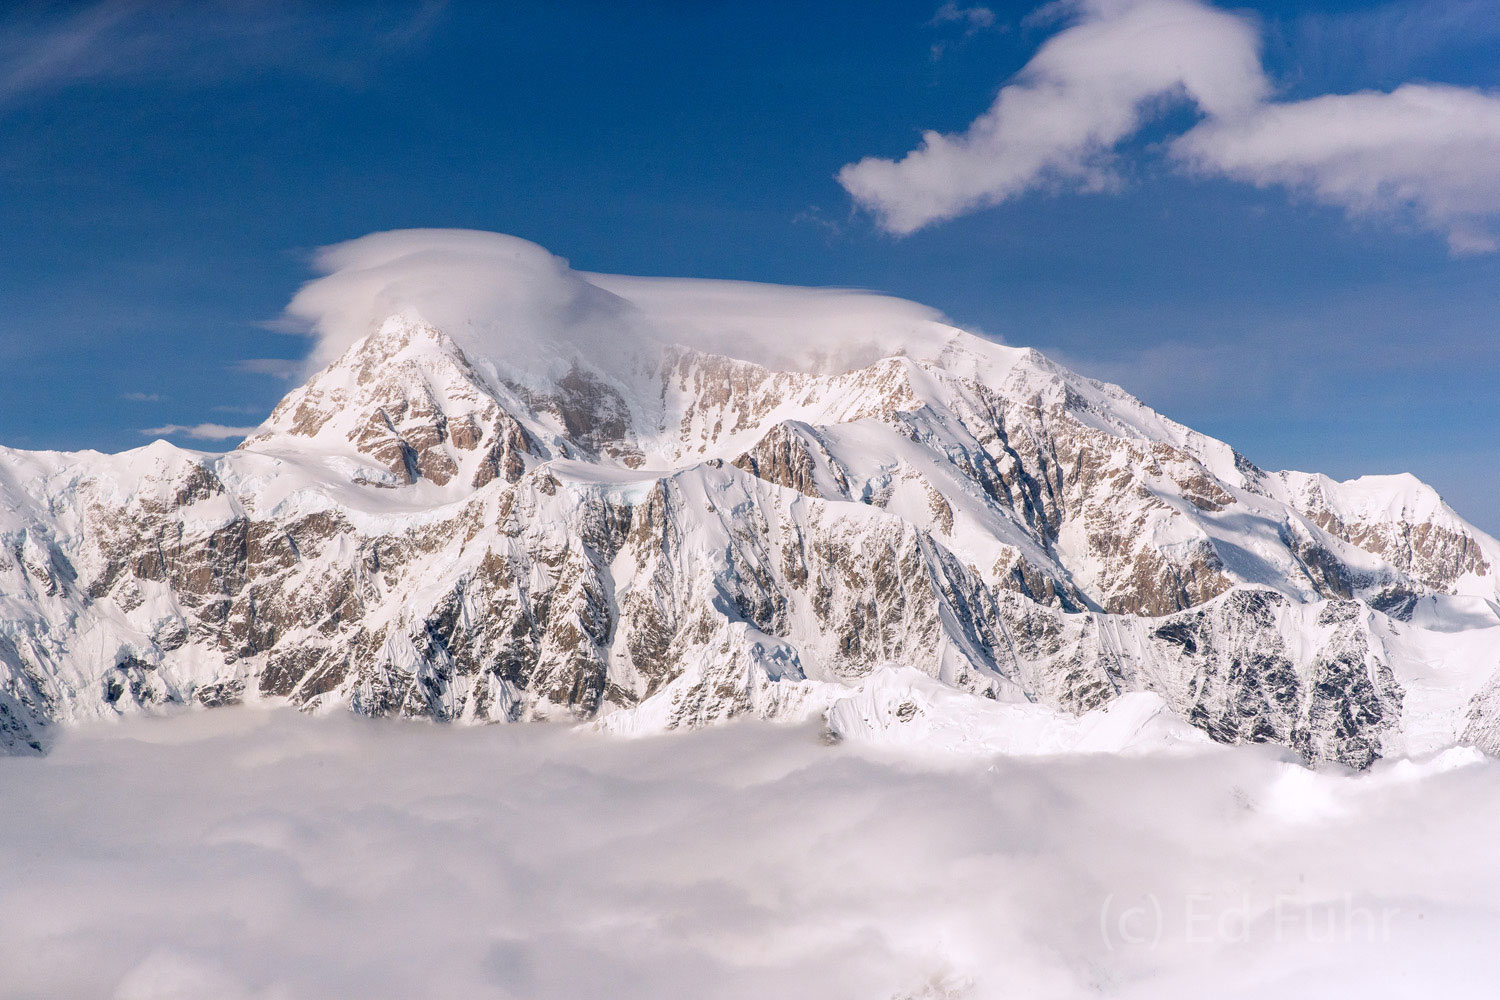 The western face of Denali rises above the clouds in the late afternoon